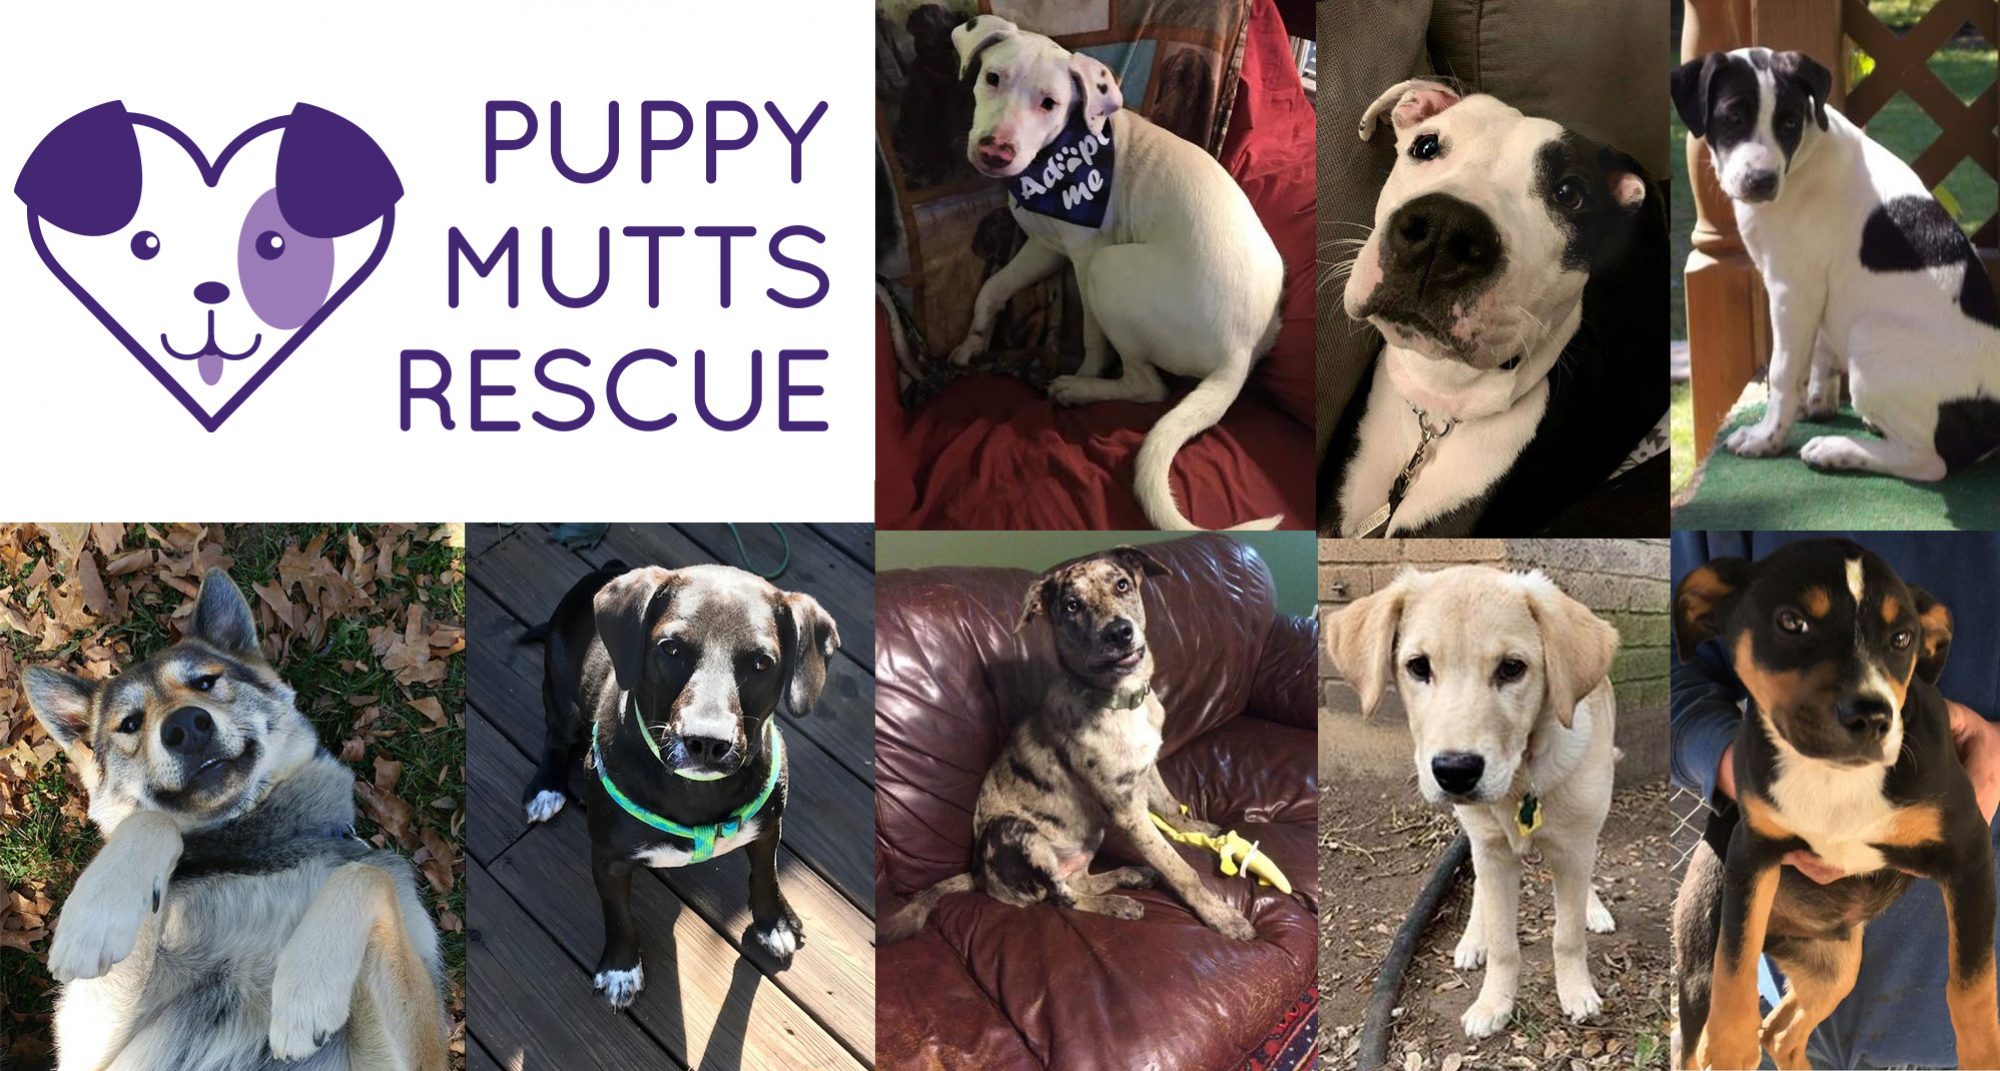 Puppy Mutts Rescue